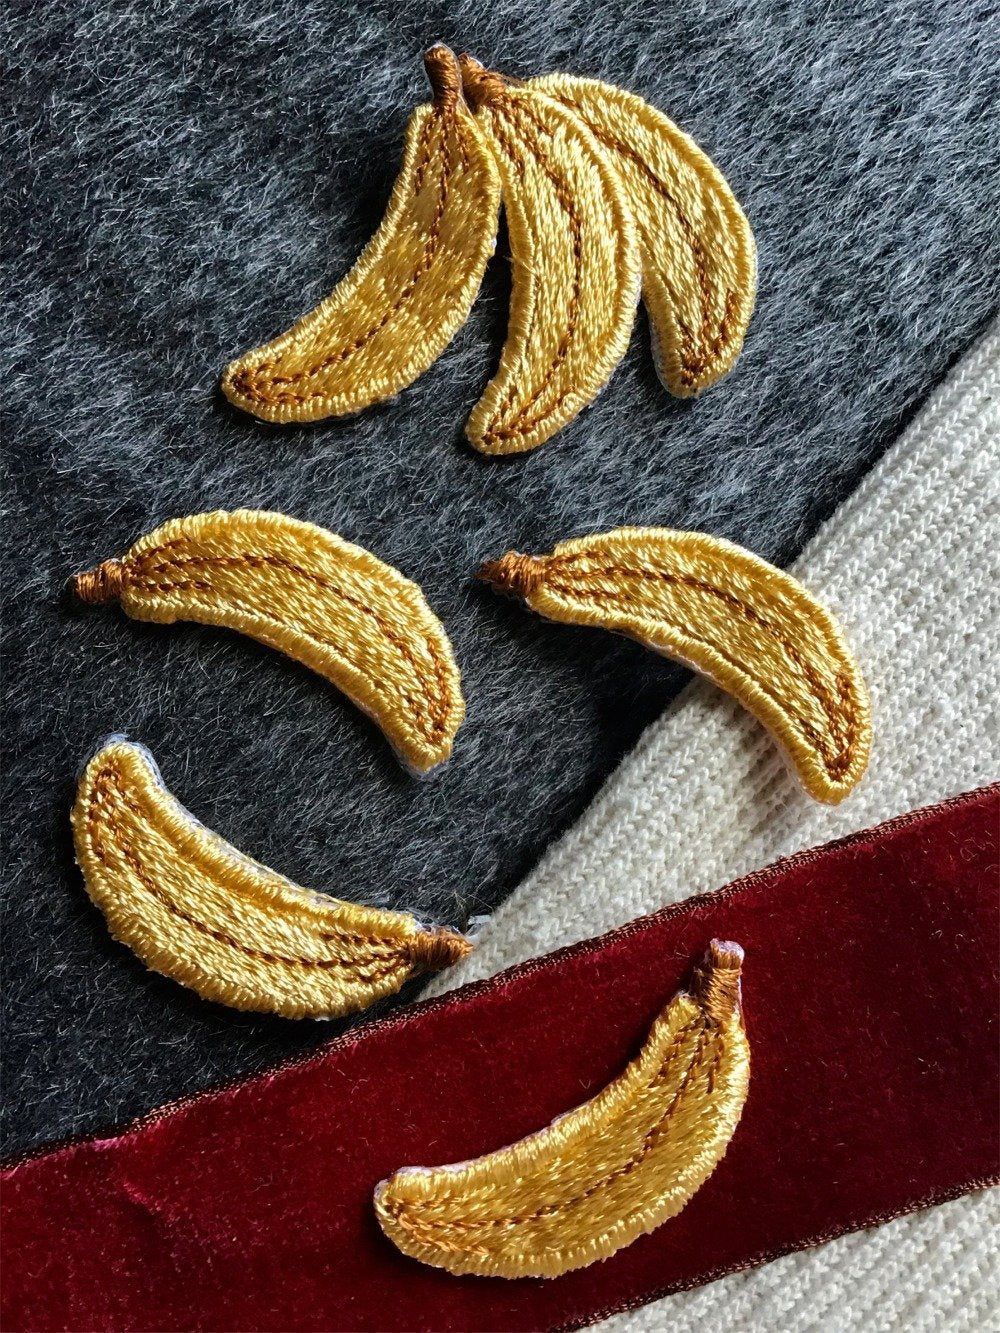 Vintage Embroidered Banana Iron-on Applique Patches #5020